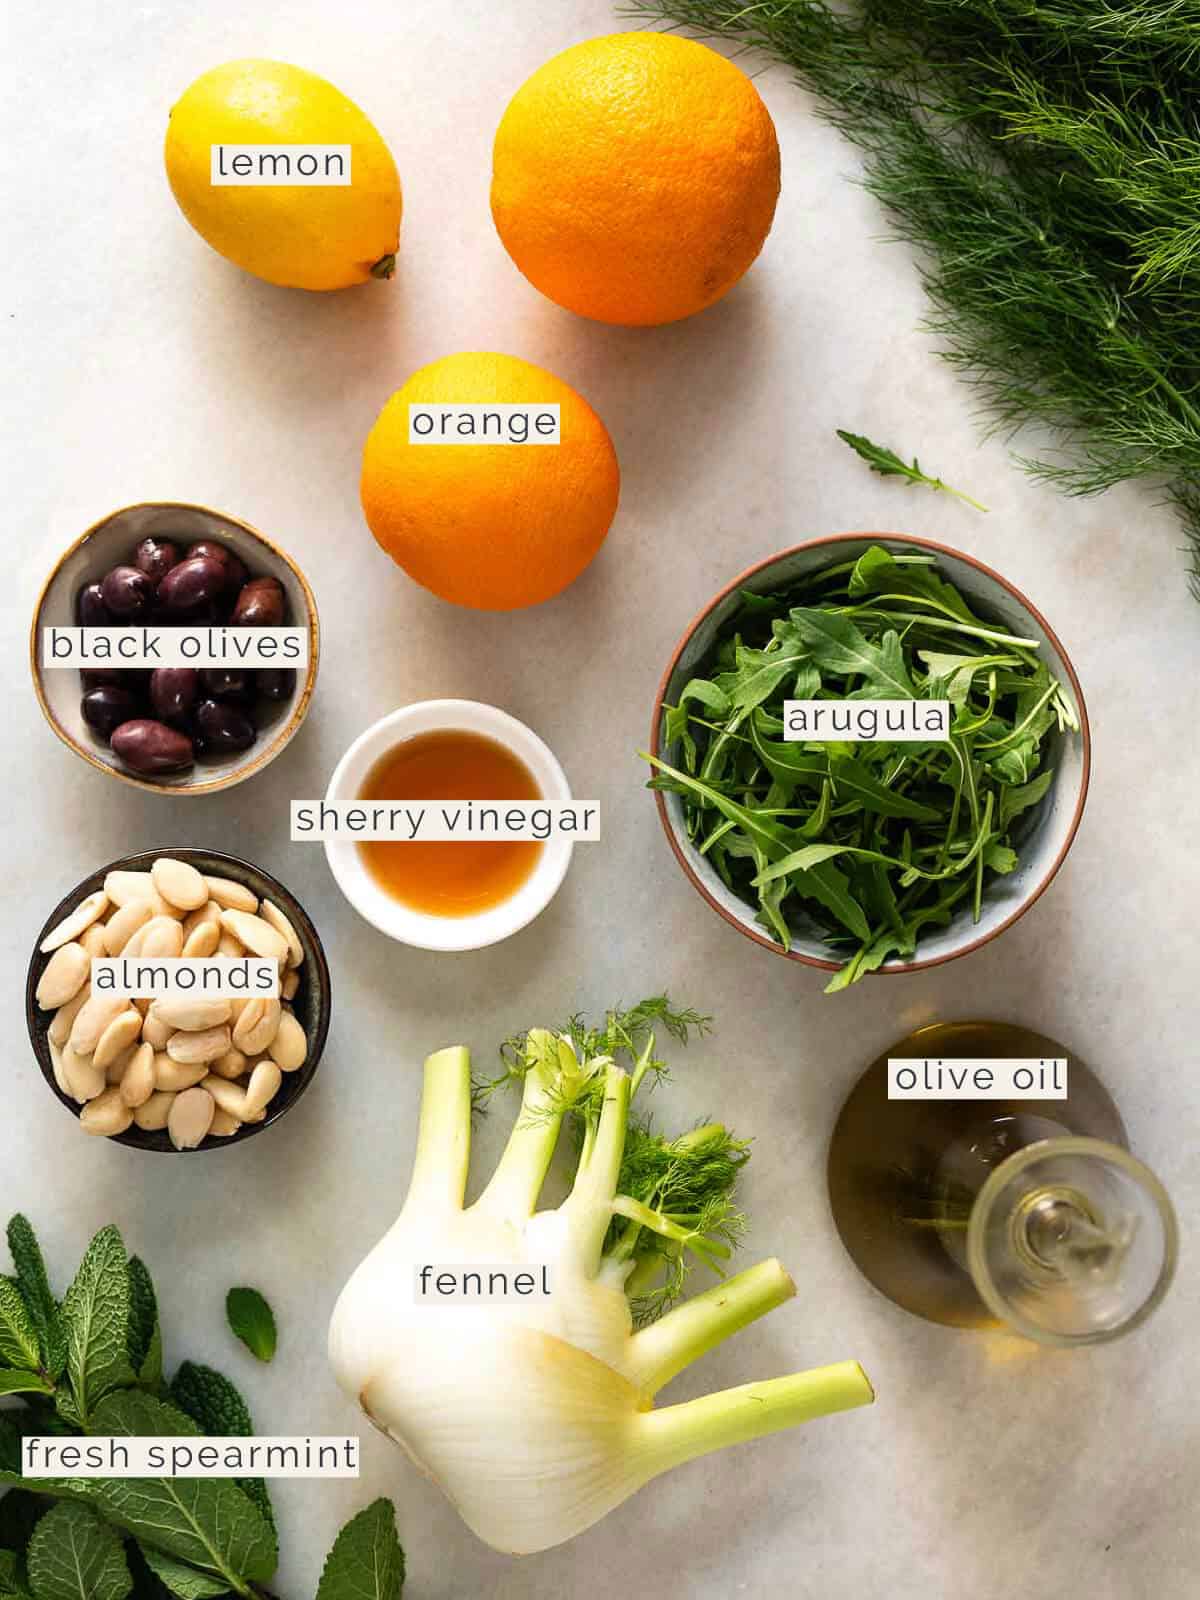 labeled ingredients to make a fennel and orange salad.